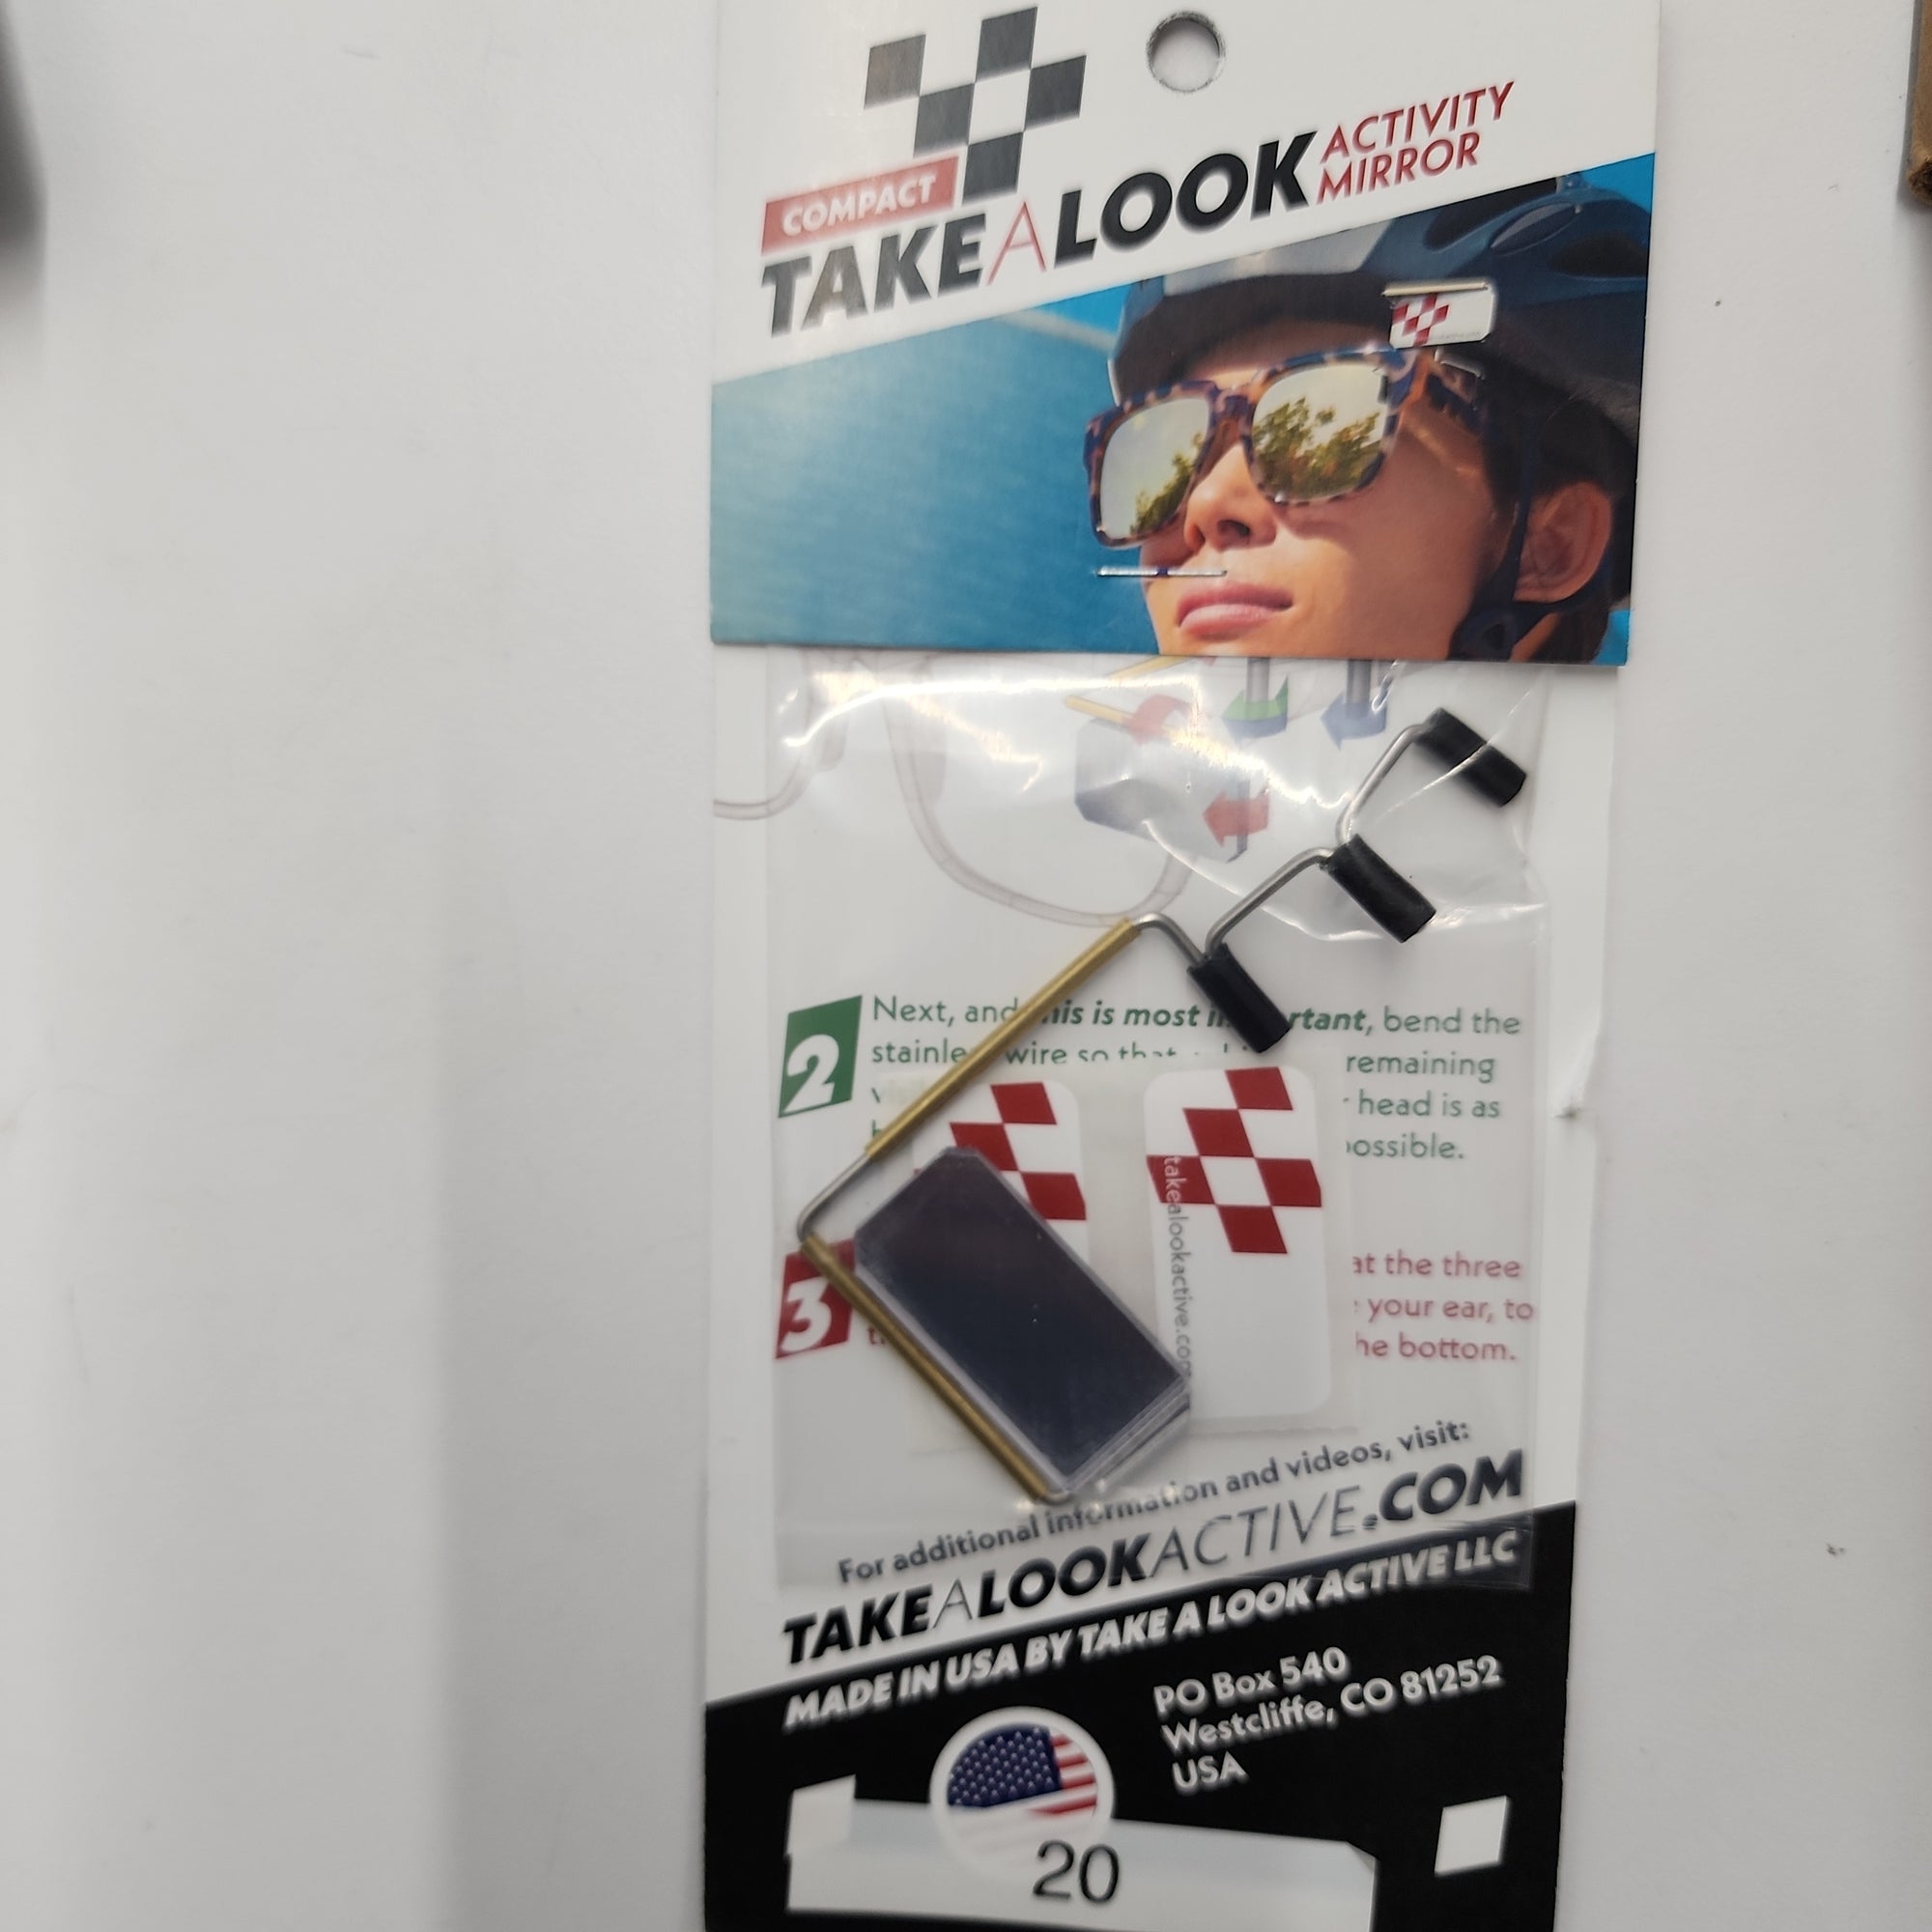 MIRROR TAKE A LOOK COMPACT F/EYEGLASSESAND VISORS ONLY